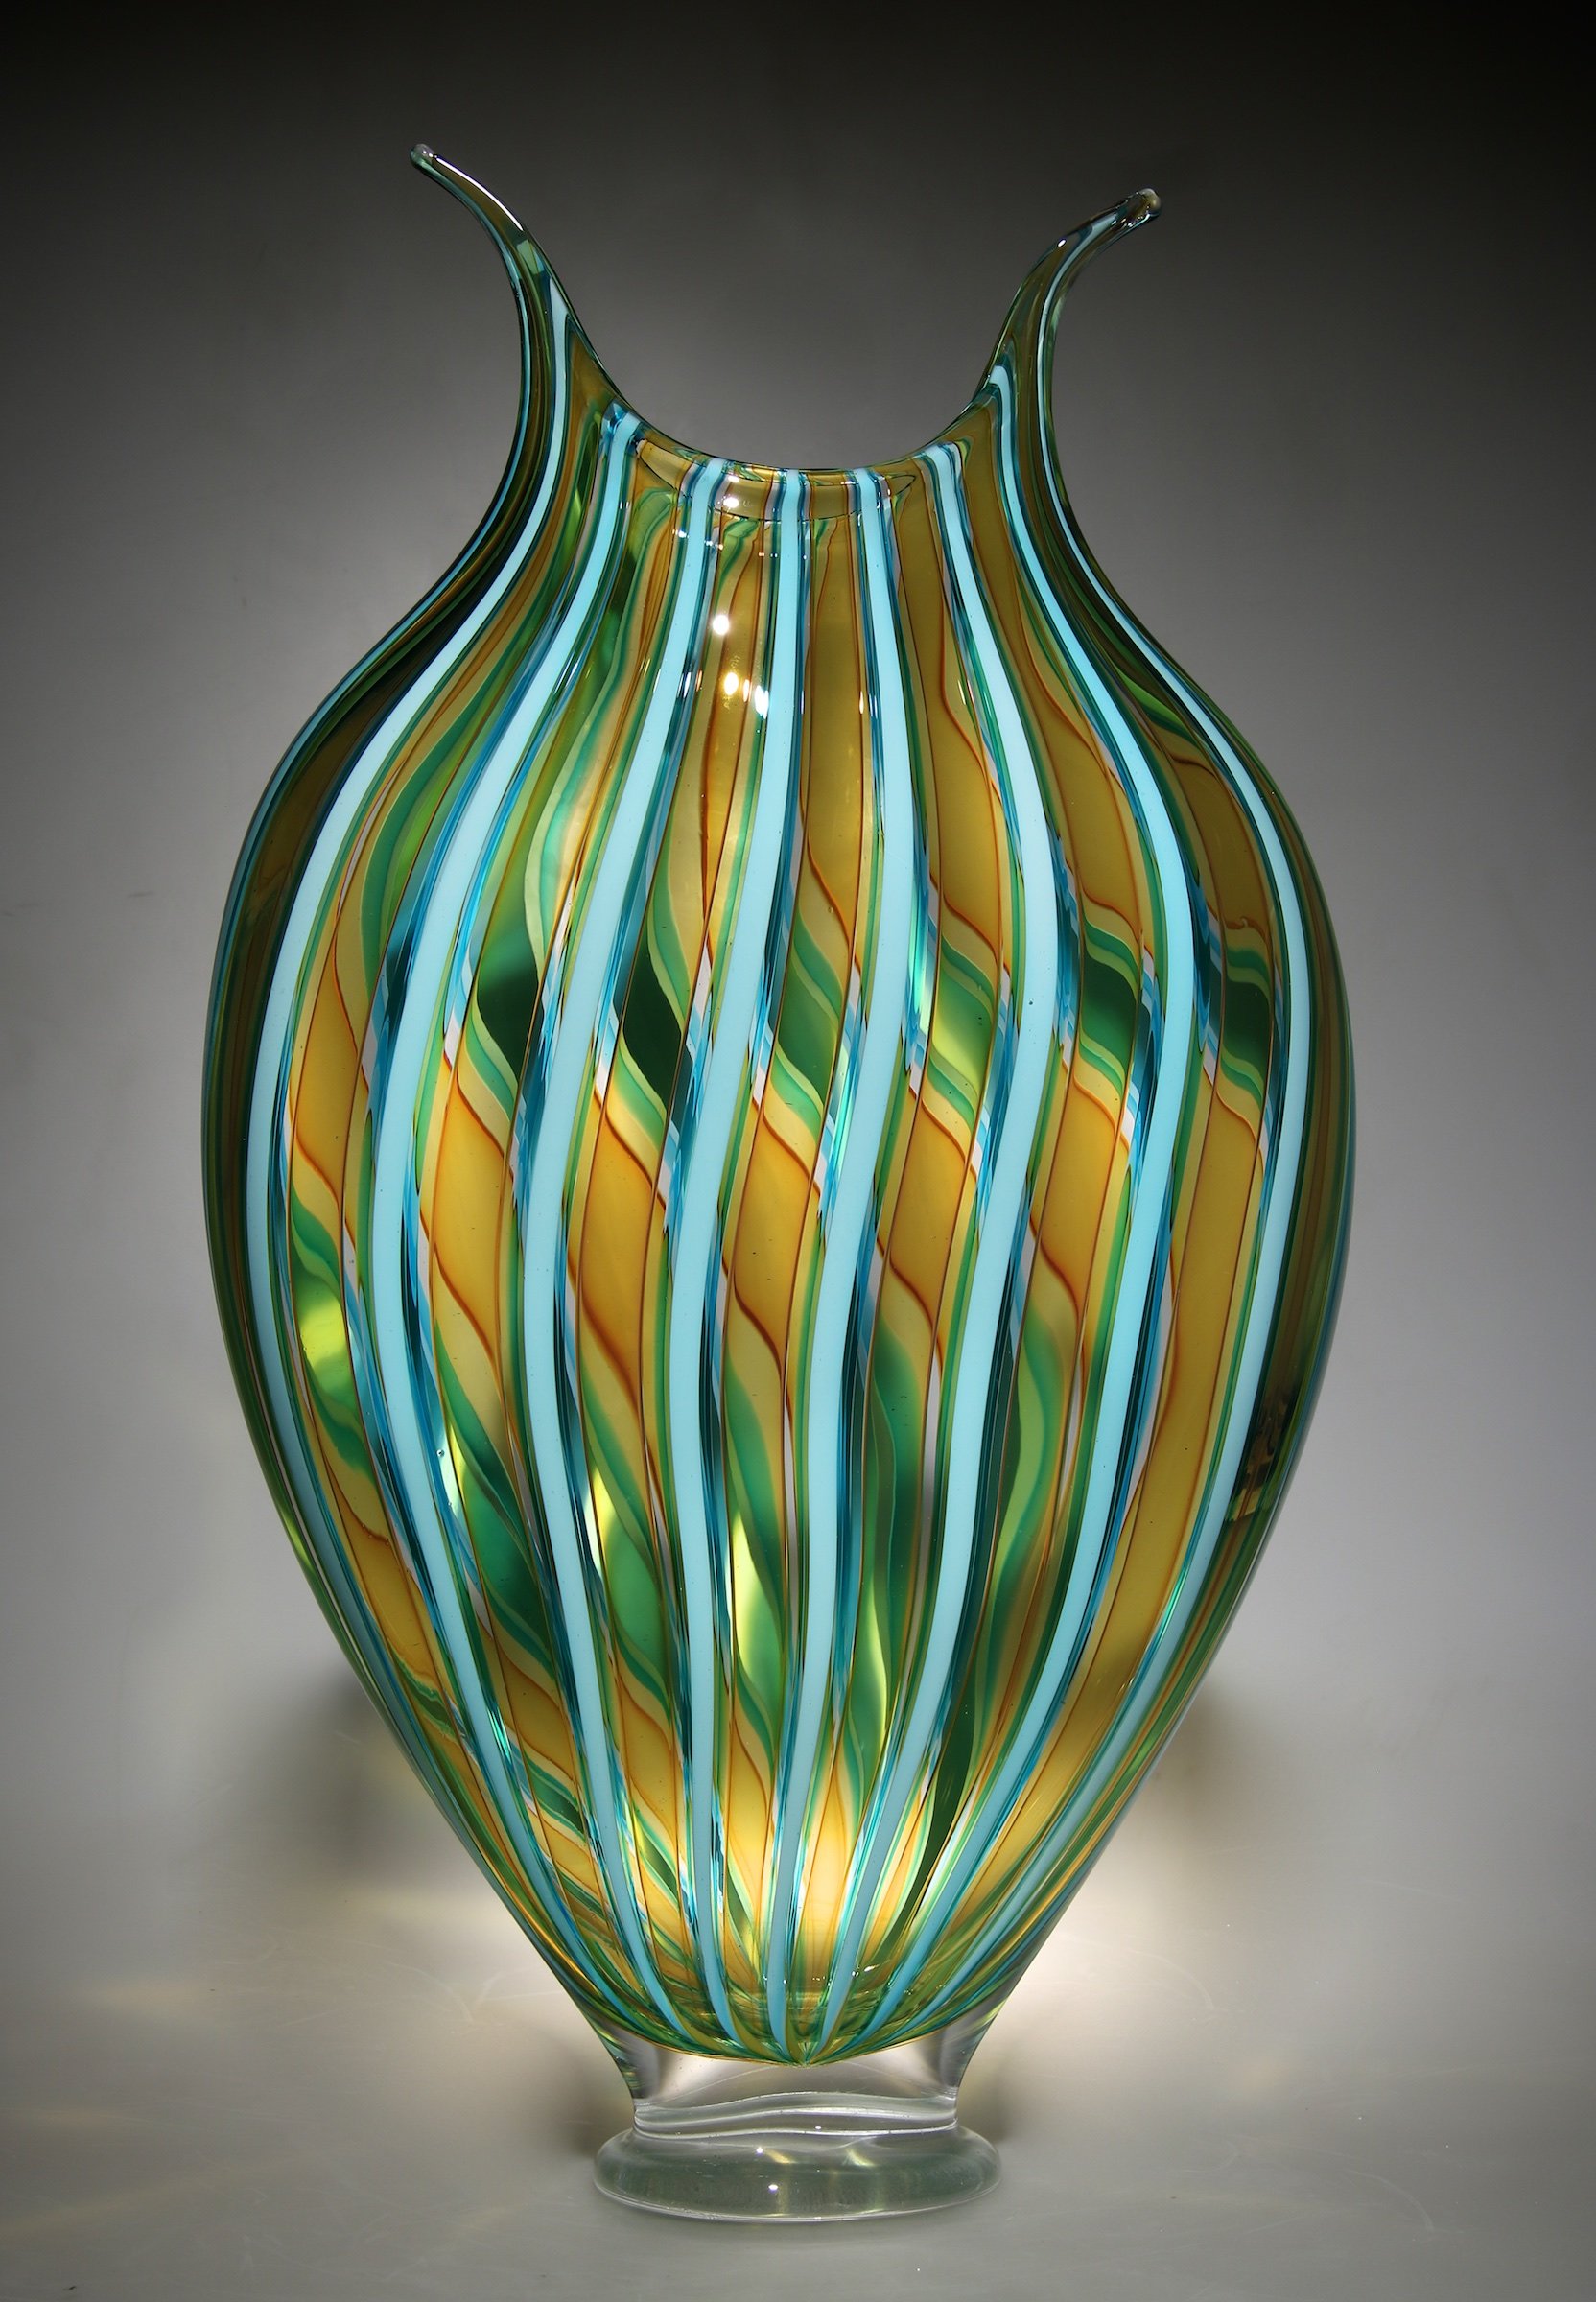 Teal And Amber Foglio By David Patchen Art Glass Sculpture Artful Home